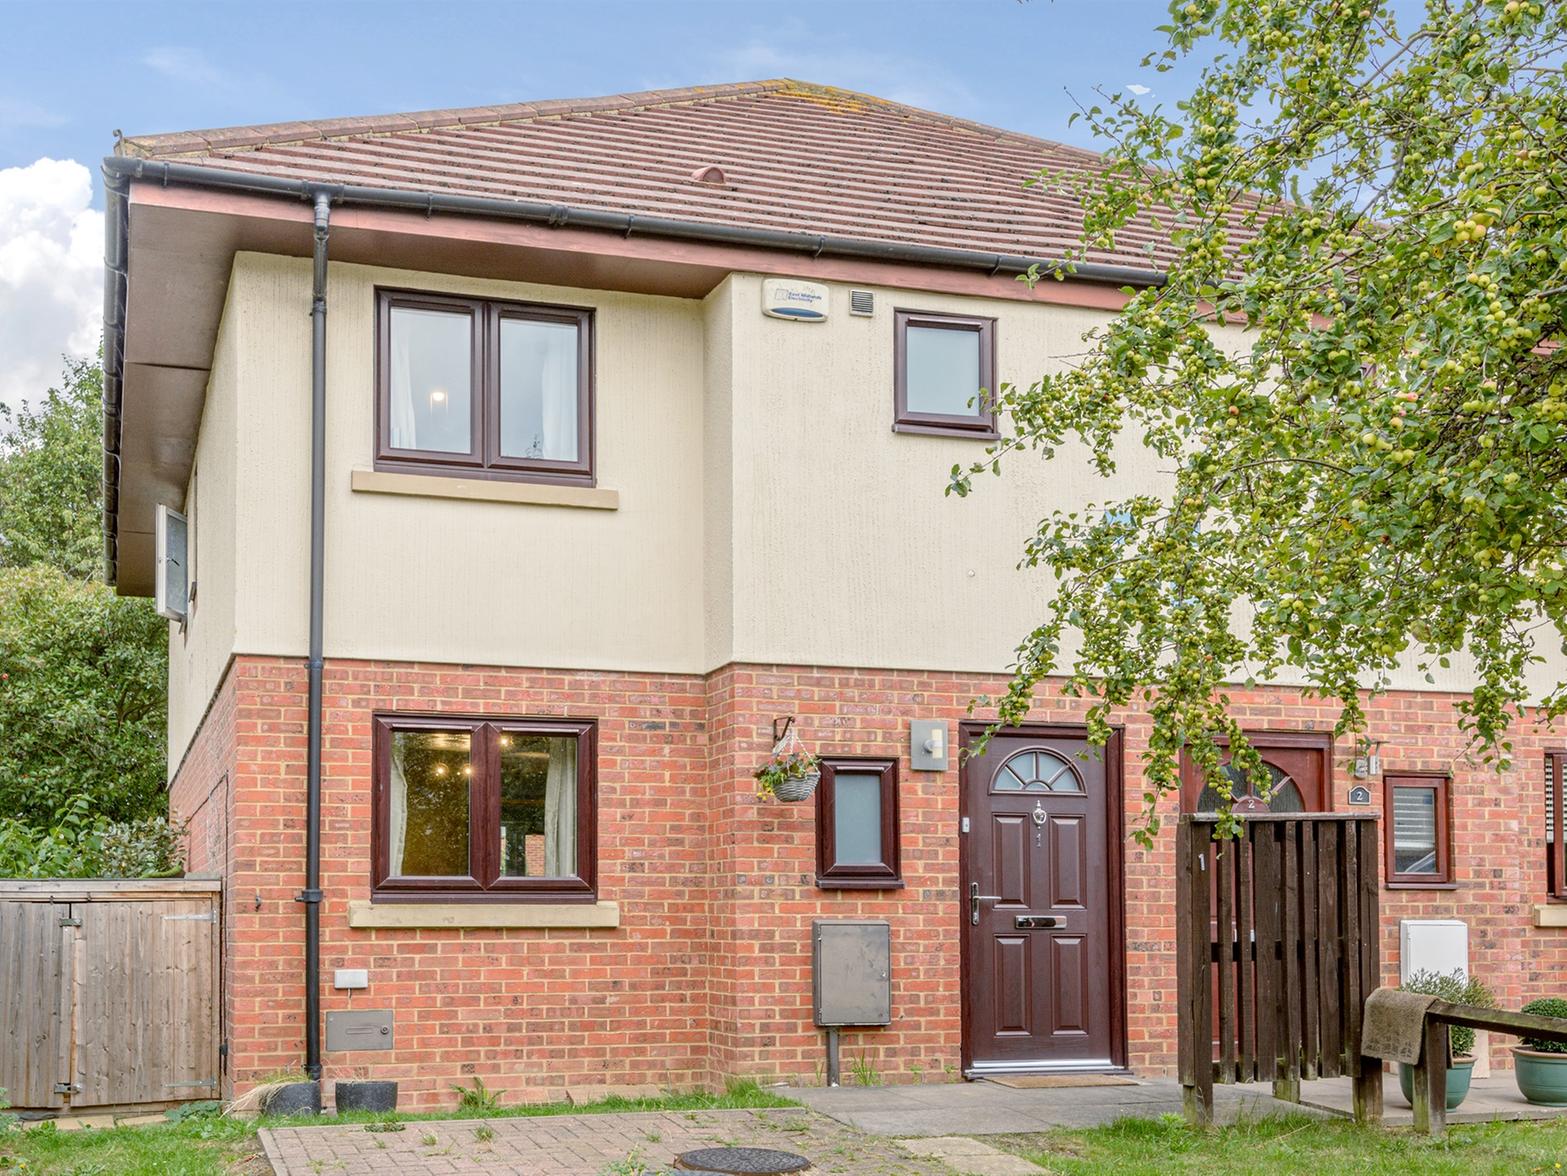 Wingfield Grove, Middleton, Milton Keynes, MK10. Price: 160,000. Property agent: Brown and Merry.